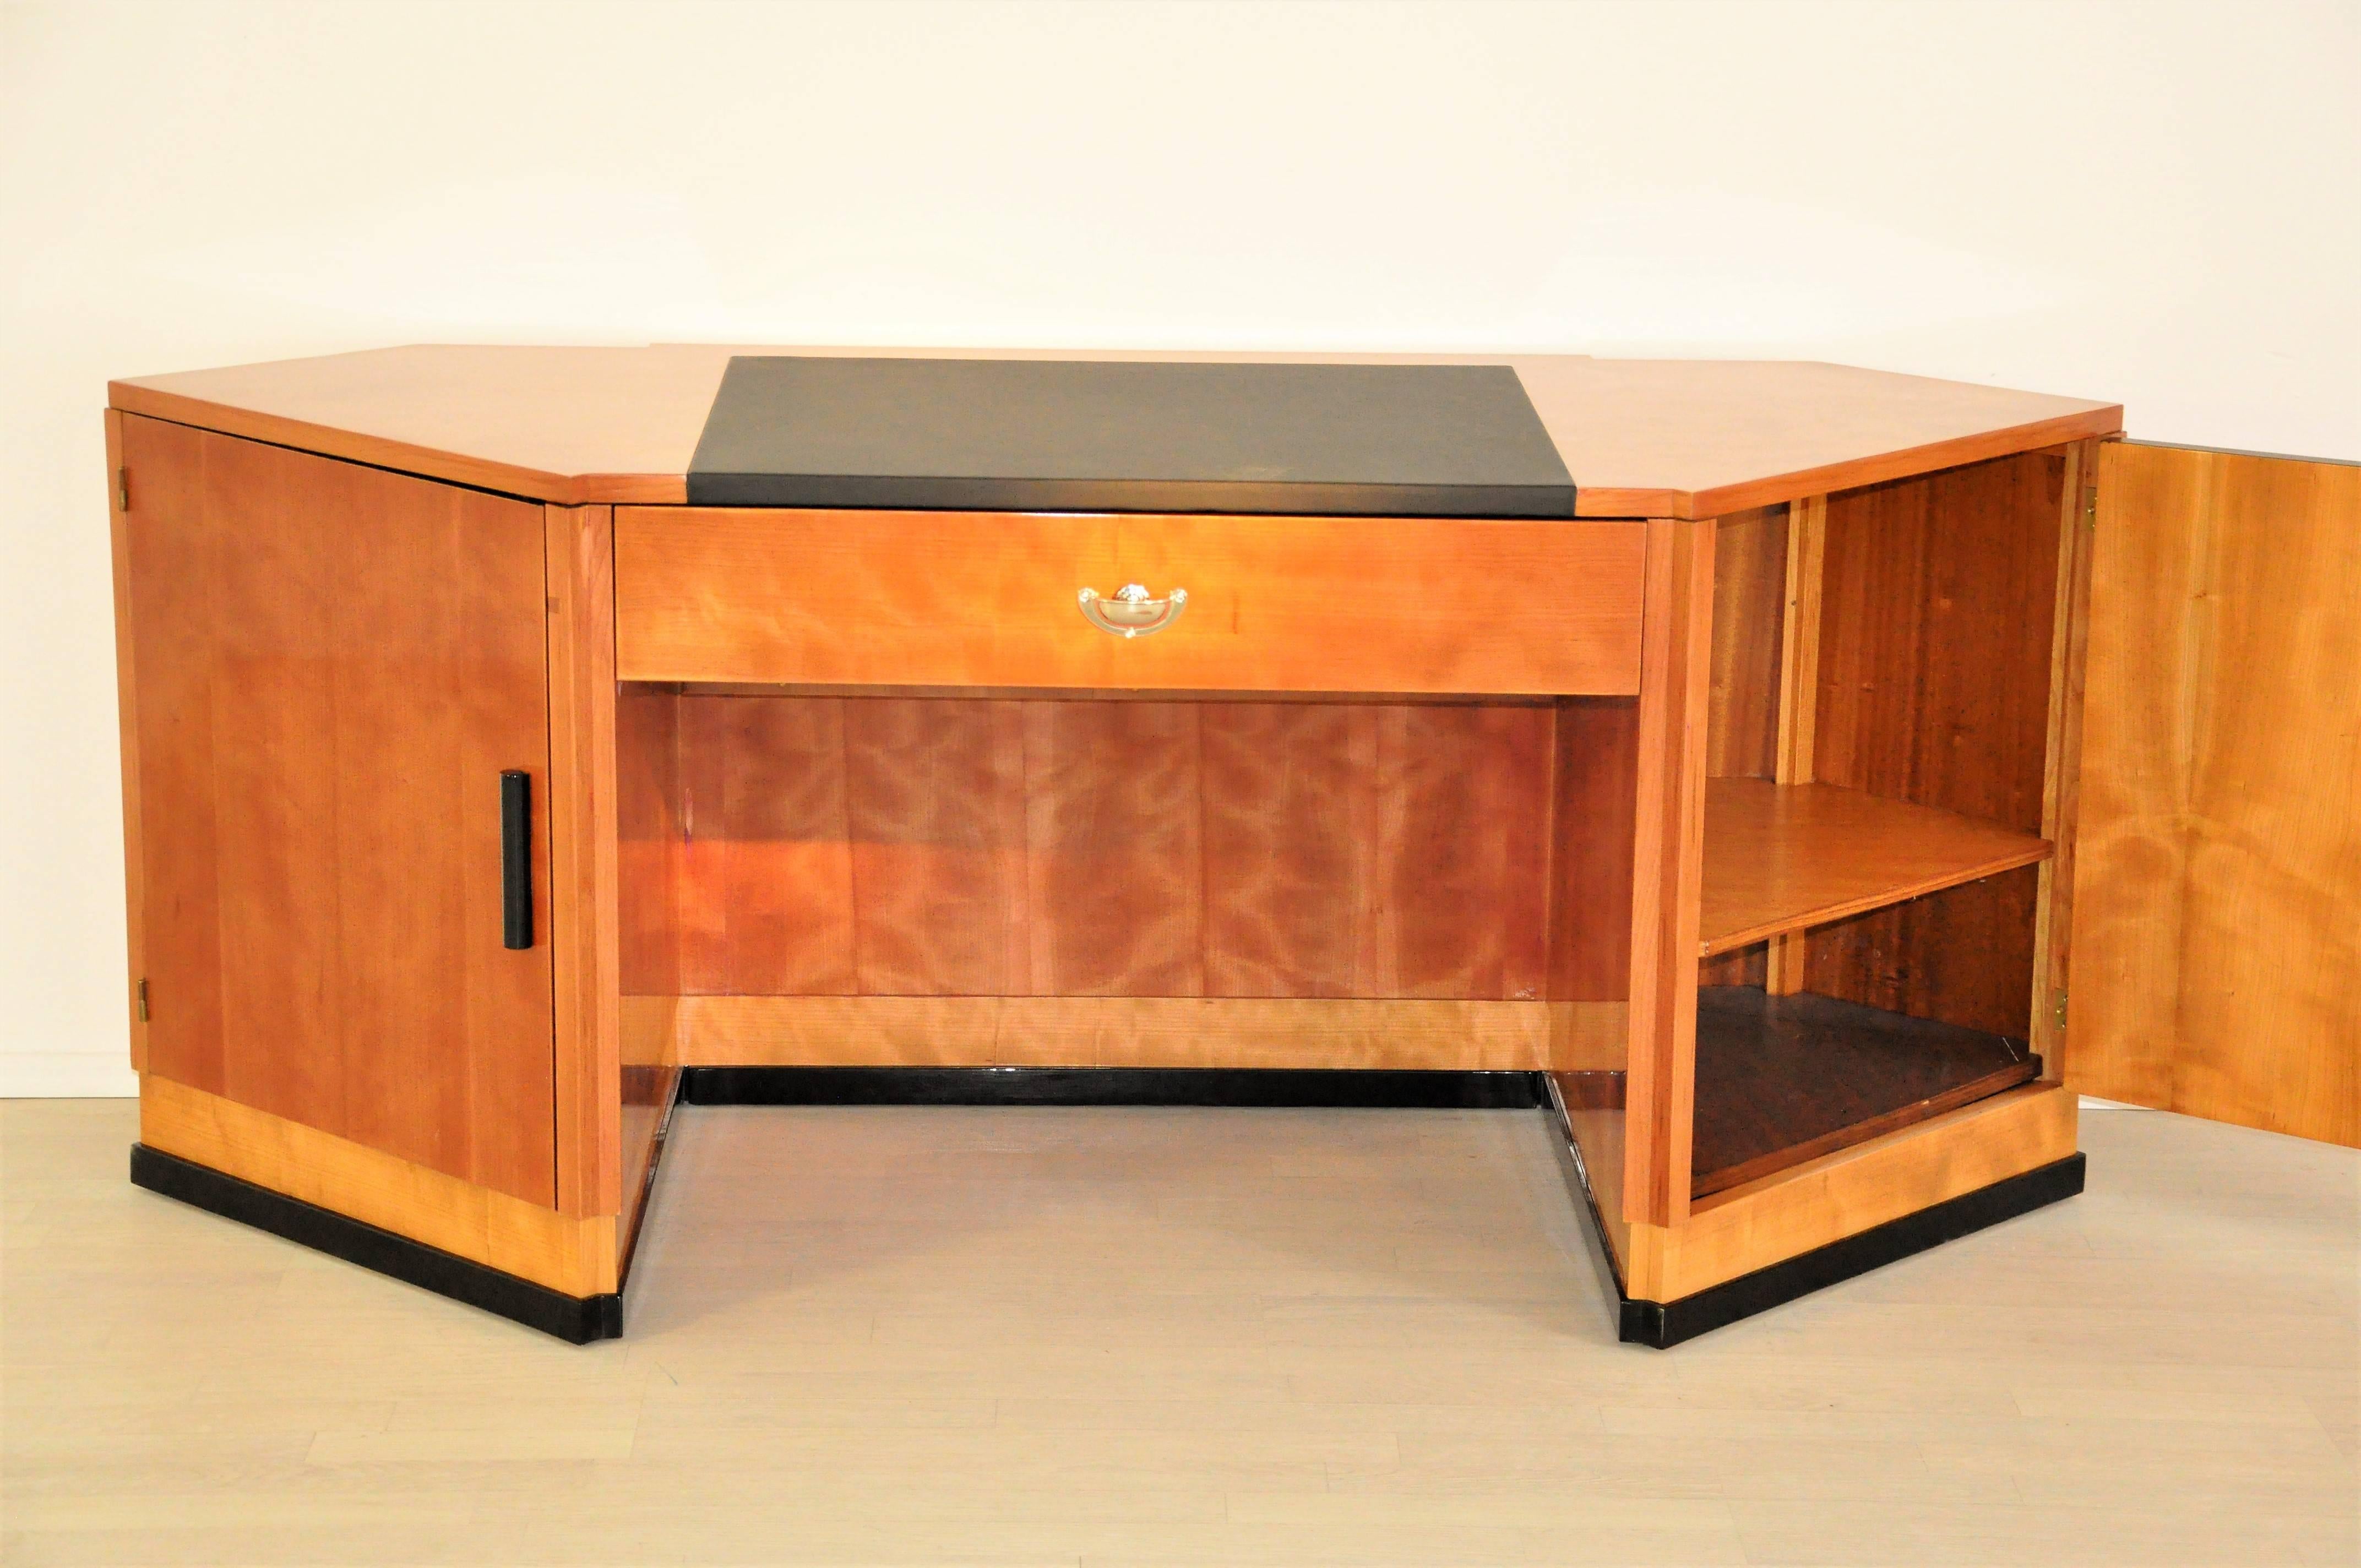 Hexagonal Art Deco Desk Made of Cherry and Mahogany Wood For Sale 1